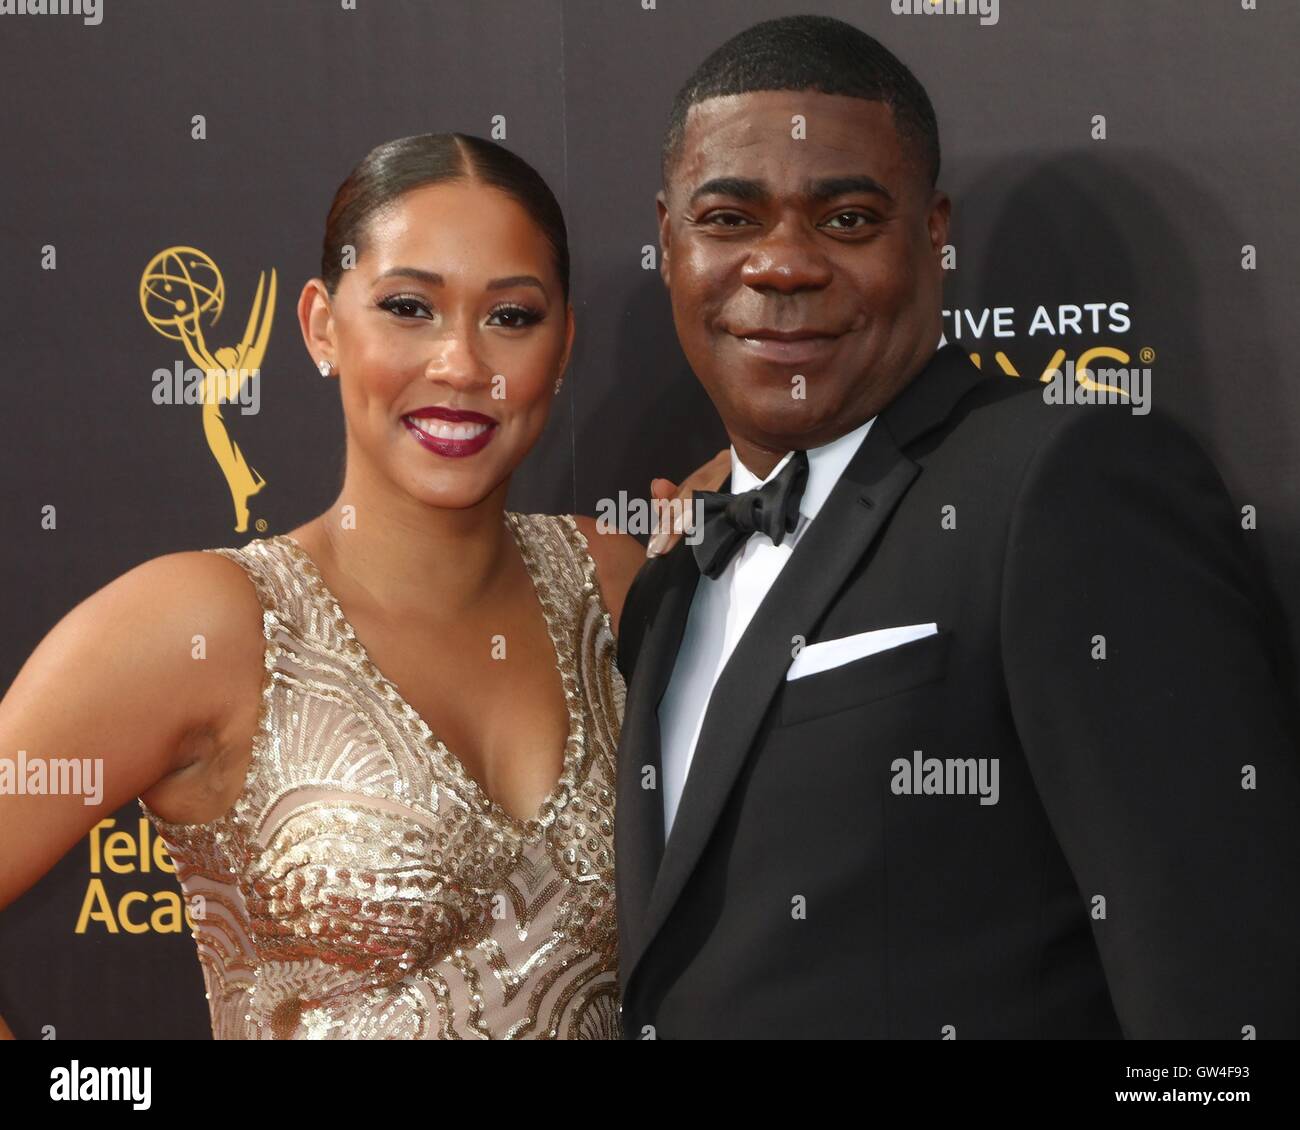 Los Angeles, CA, USA. 10th Sep, 2016. Megan Wollover, Tracy Morgan at arrivals for 2016 Creative Arts Emmy Awards - SAT, Microsoft Theater, Los Angeles, CA September 10, 2016. Credit:  Priscilla Grant/Everett Collection/Alamy Live News Stock Photo